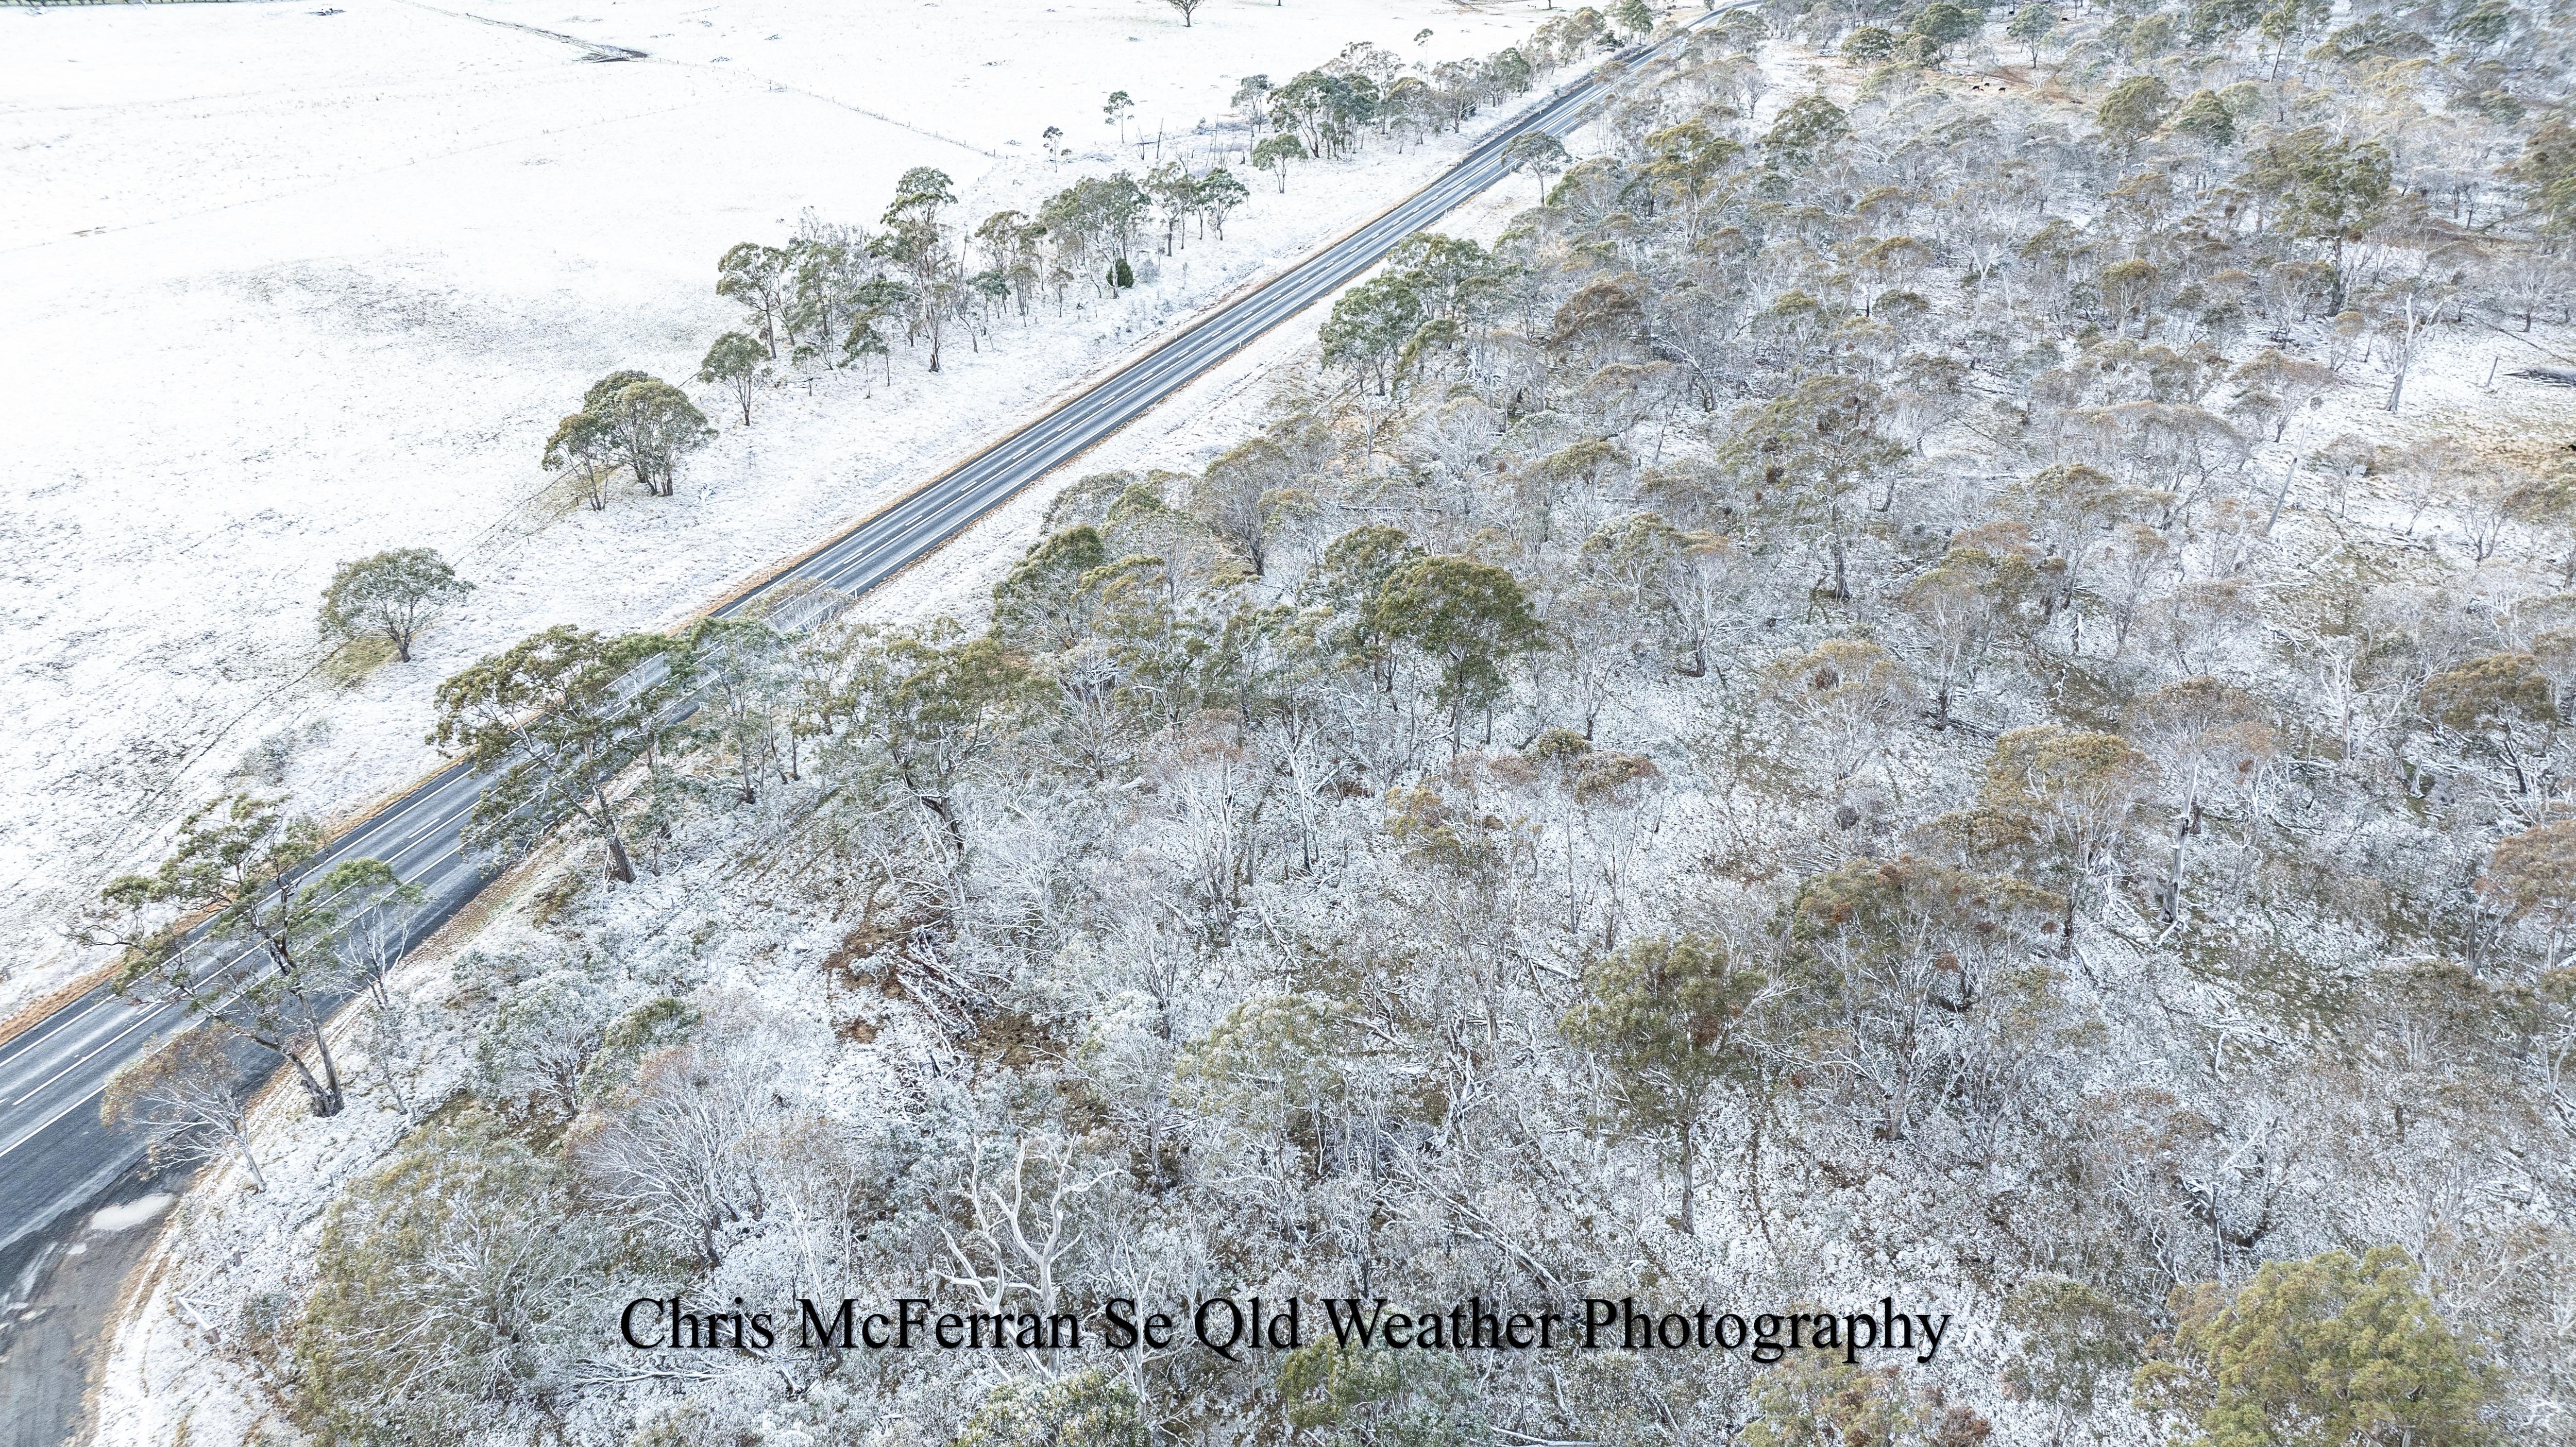 A drone image of trees in the Ben Lomond Range near Guyra covered with a dusting of snow